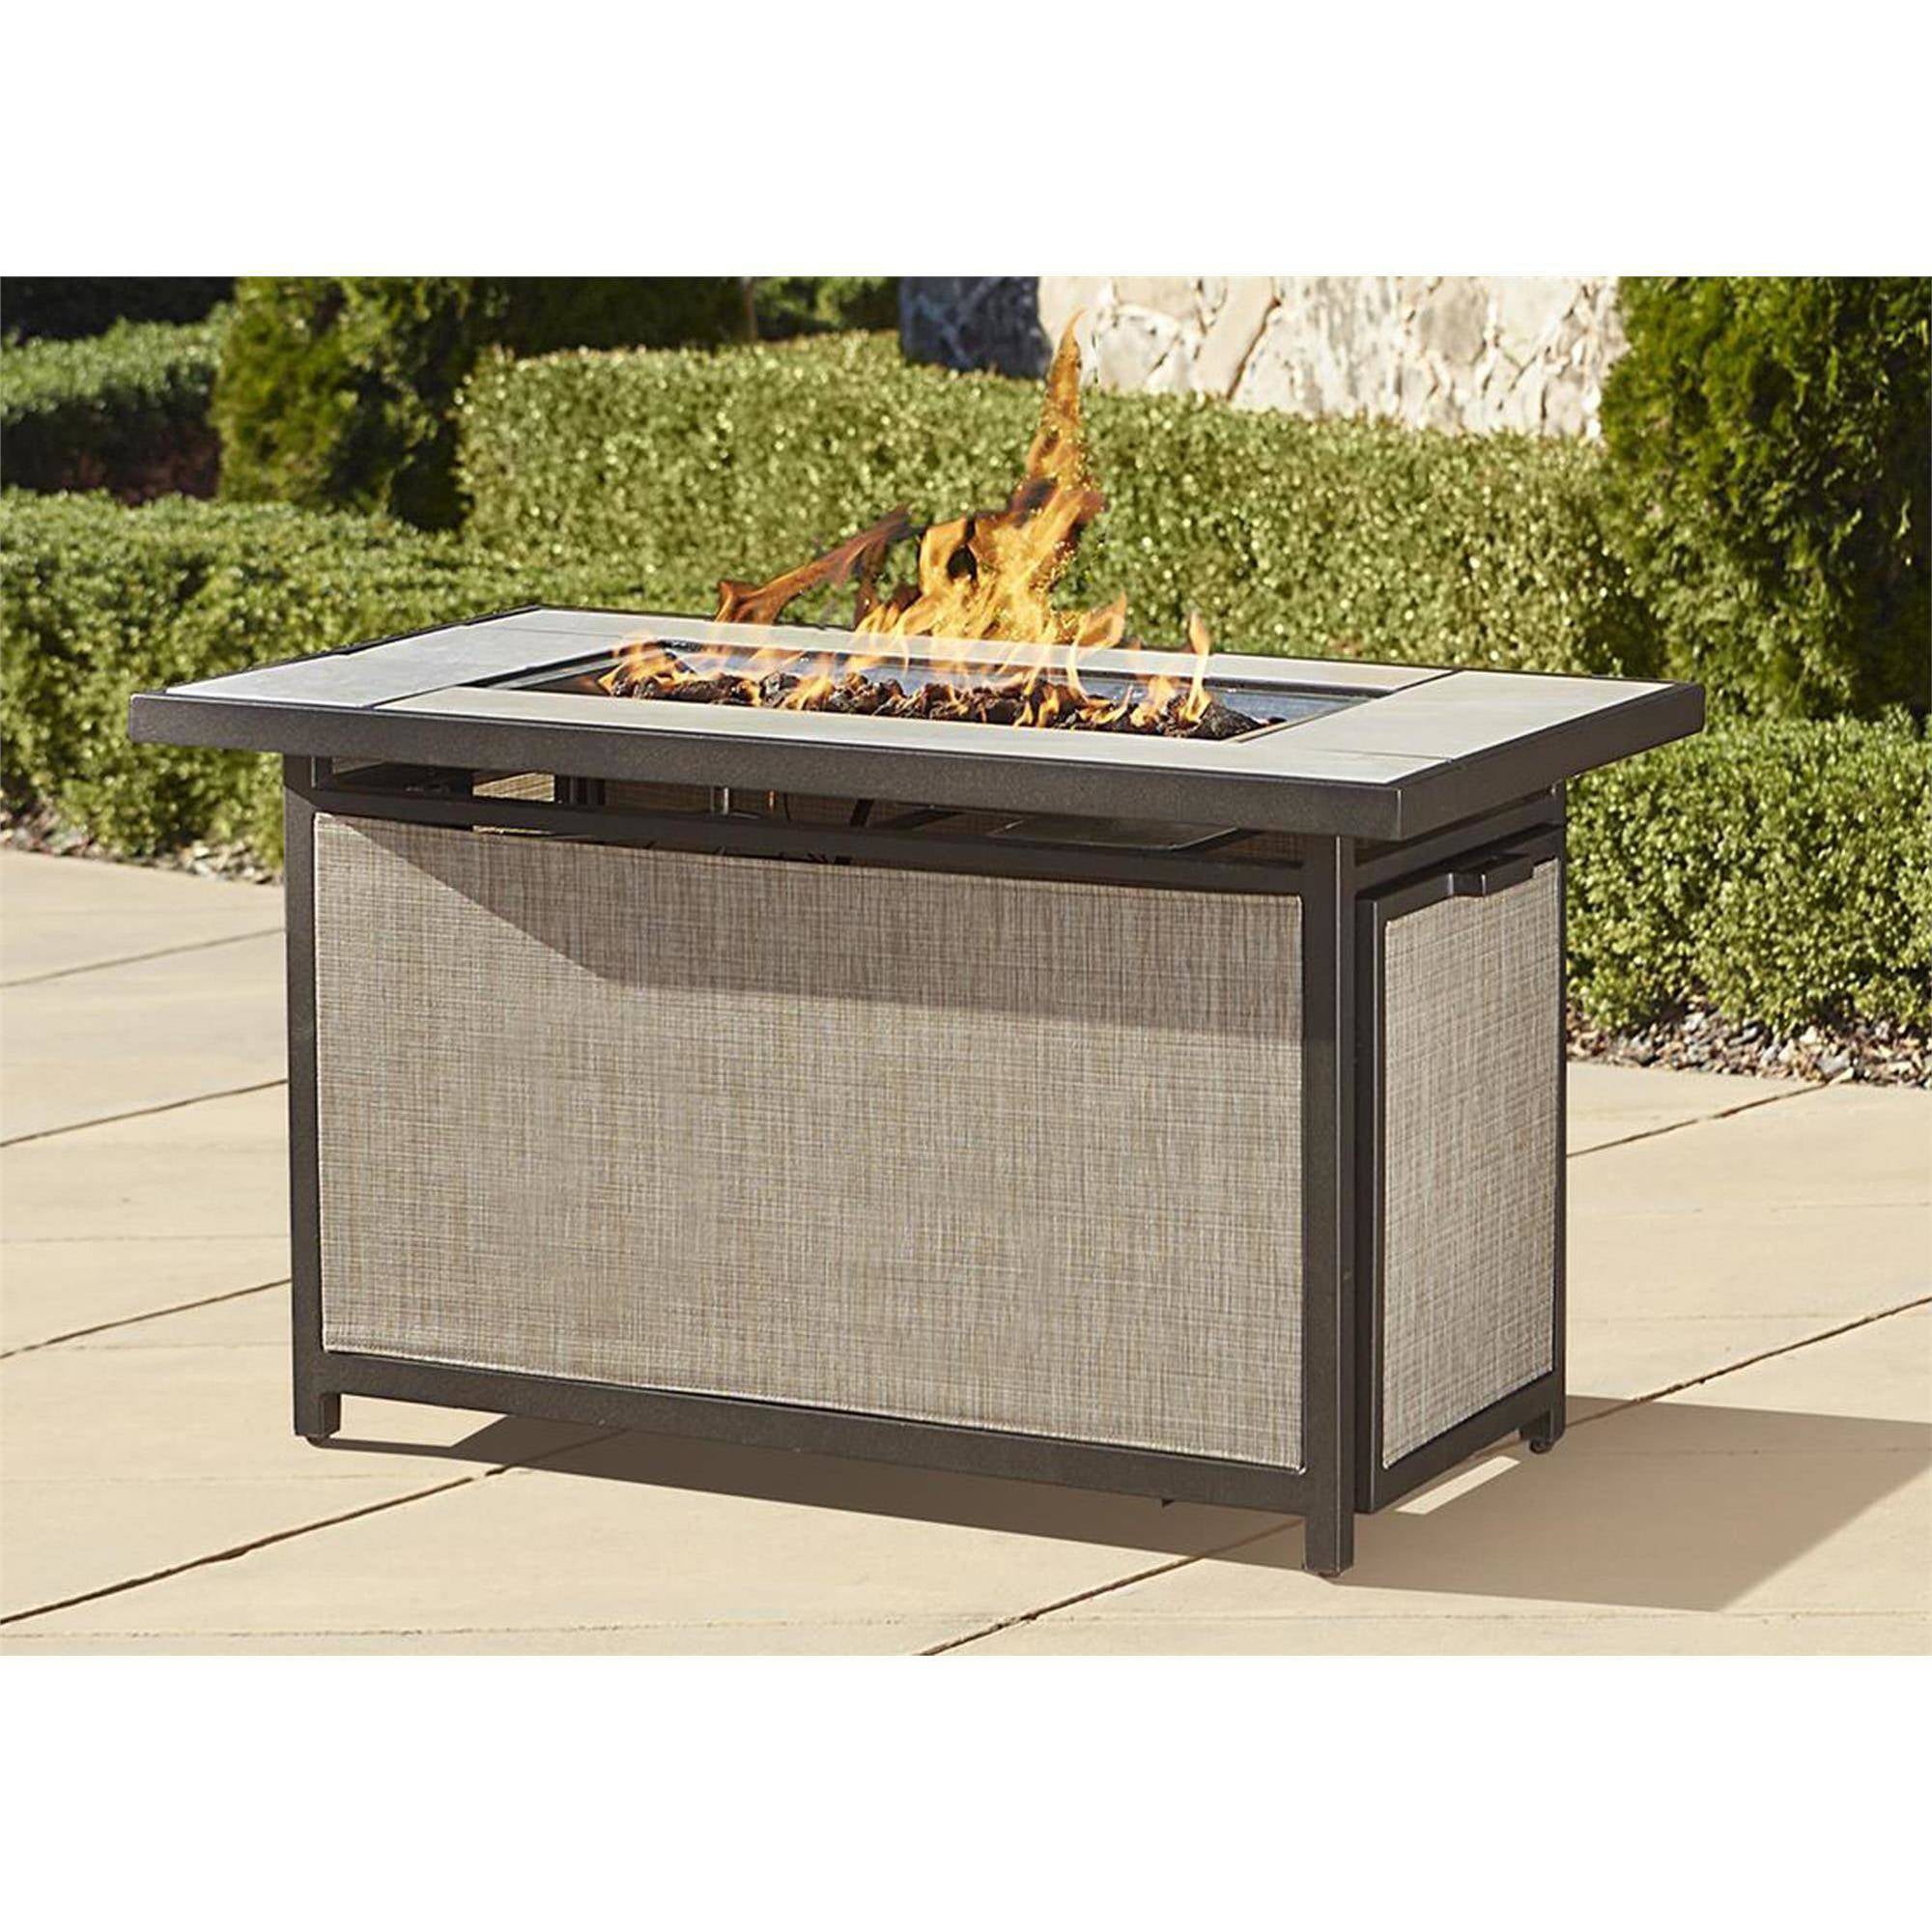 Aluminum Propane Gas Fire Pit Table, Outdoor Propane Gas Fire Pit Table